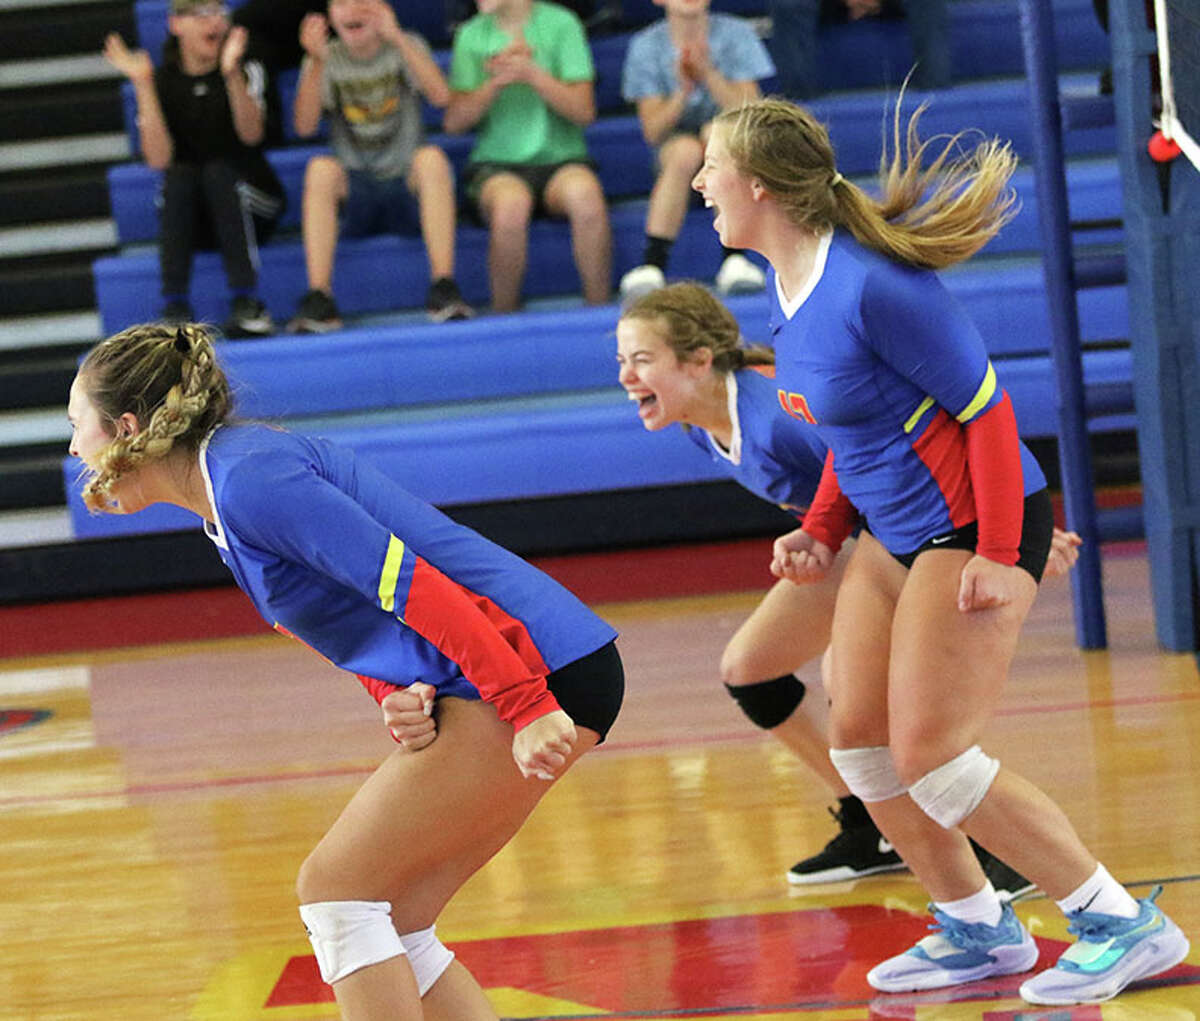 Roxana's Laynie Gehrs (back), Destiny Vuylsteke (right) and Peyton Petit celebrate a point during a Roxana Tourney match in August. On Thursday, the Shells and Oilers celebrated the raising of $12,000 for cancer research in their Digging for a Cure match in Wood River.